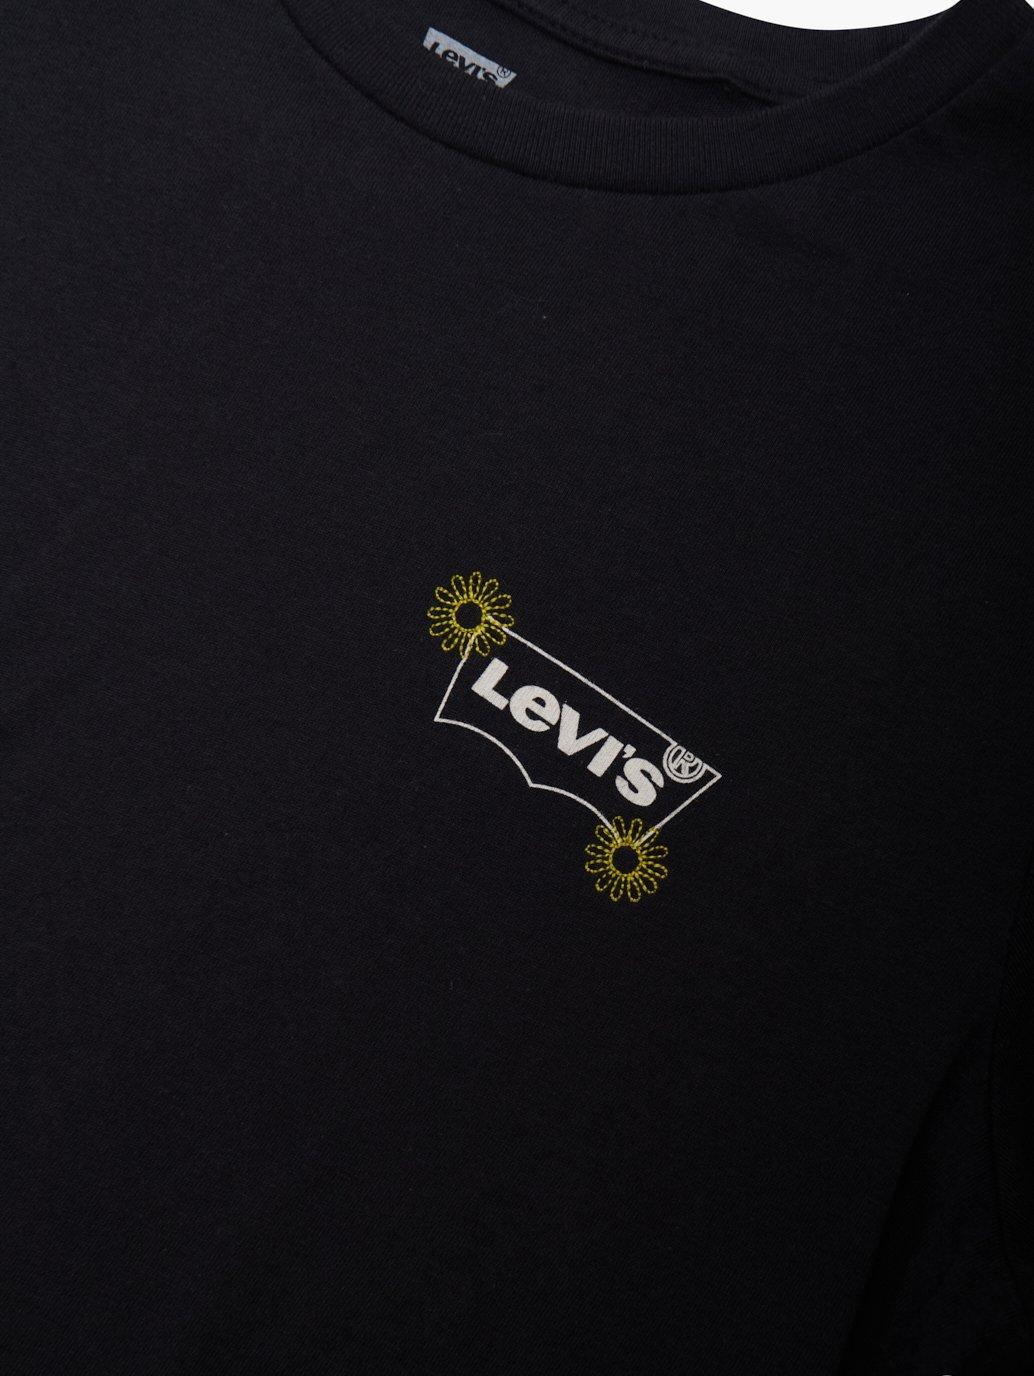 levis malaysia womens graphic jordie tee A04580044 16 Details